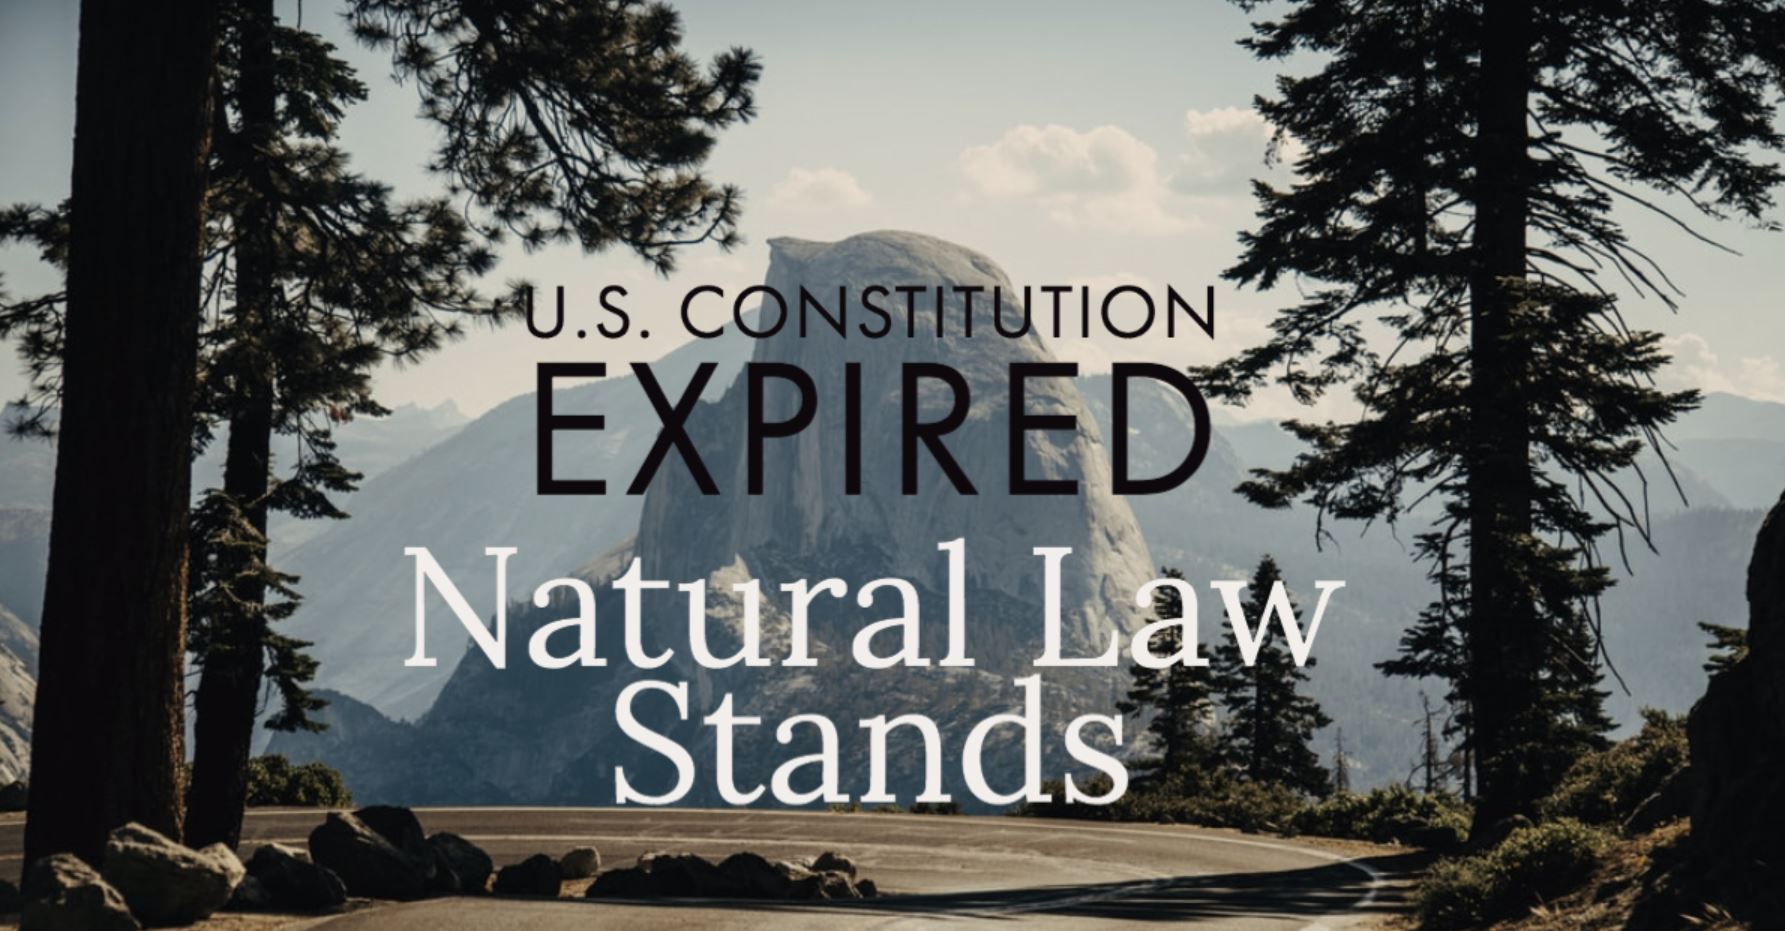 U.S. Constitution Expired. California Exemptions Revoked. Natural Law Stands. Constitution-expired-noh